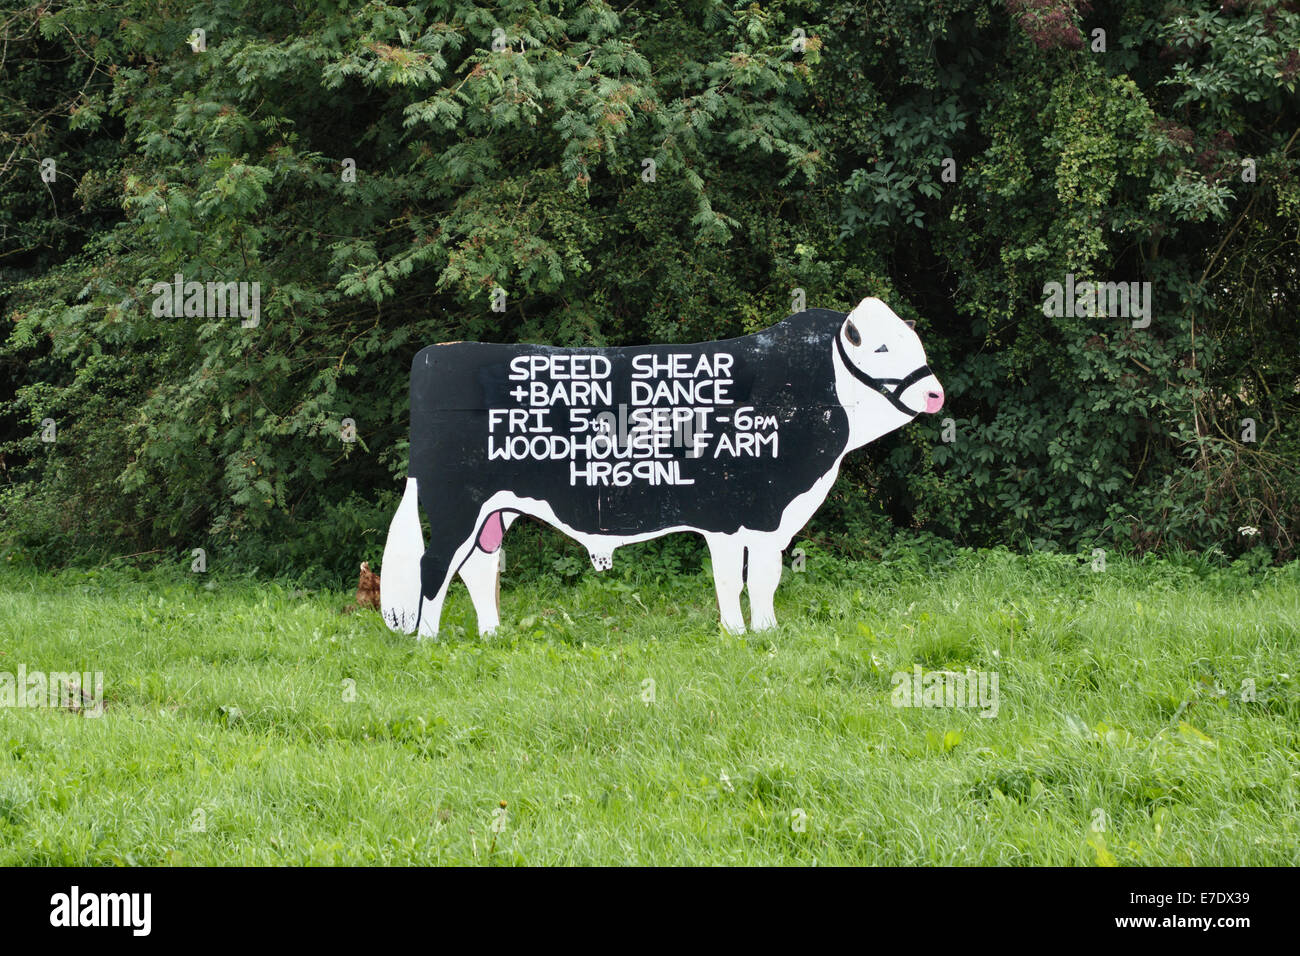 Sign in the shape of a bull advertising  a speed shearing and barn dance organised by the local Young Farmers' Club (YFC), Wales, UK Stock Photo